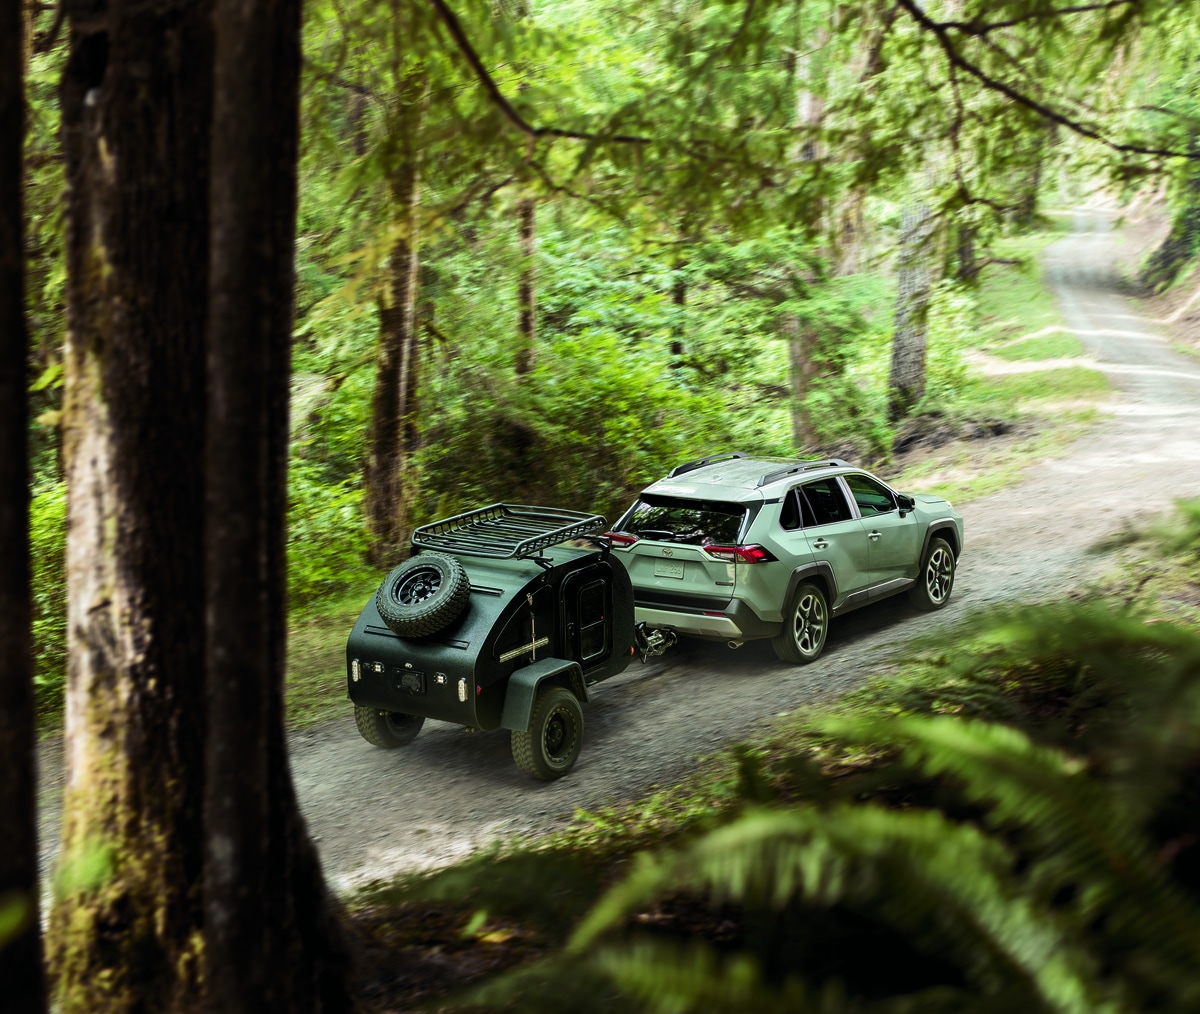 silver Toyota RAV4 SUV towing a teardrop trailer through the woods